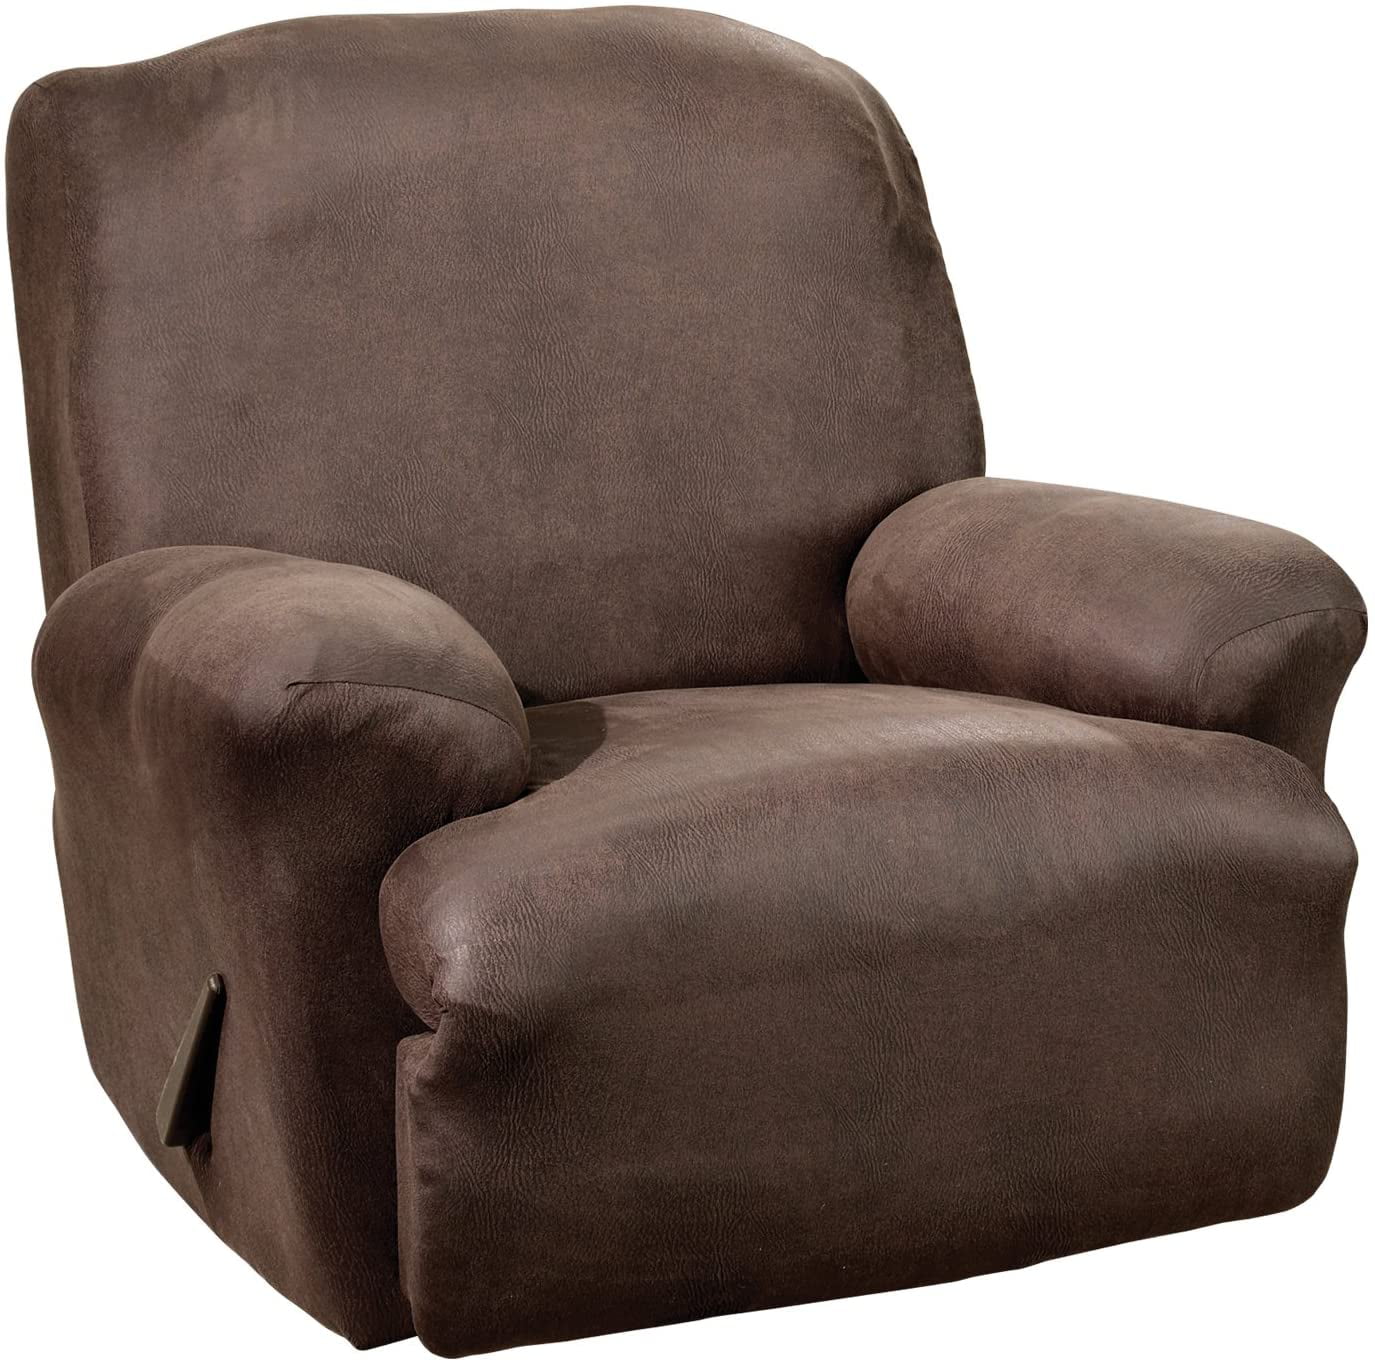 Sure Fit Stretch Leather Recliner, Faux Leather Chair Covers